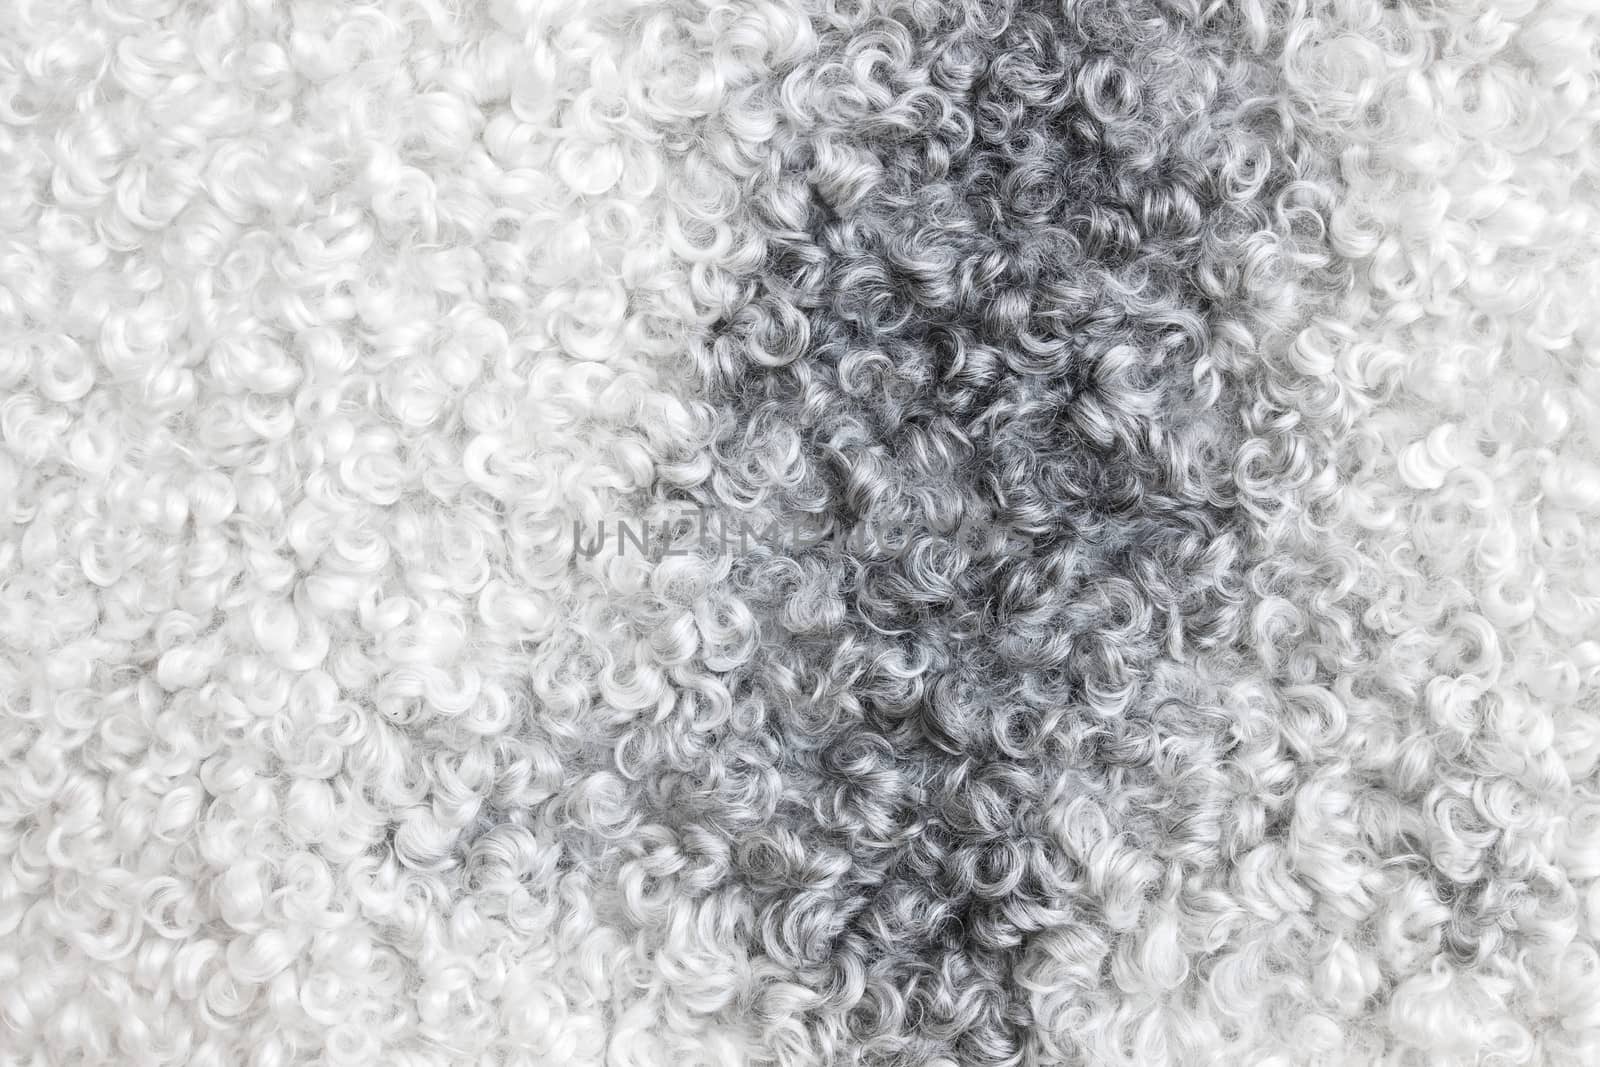 Close-up of white and gray sheepskin. Abstract background.